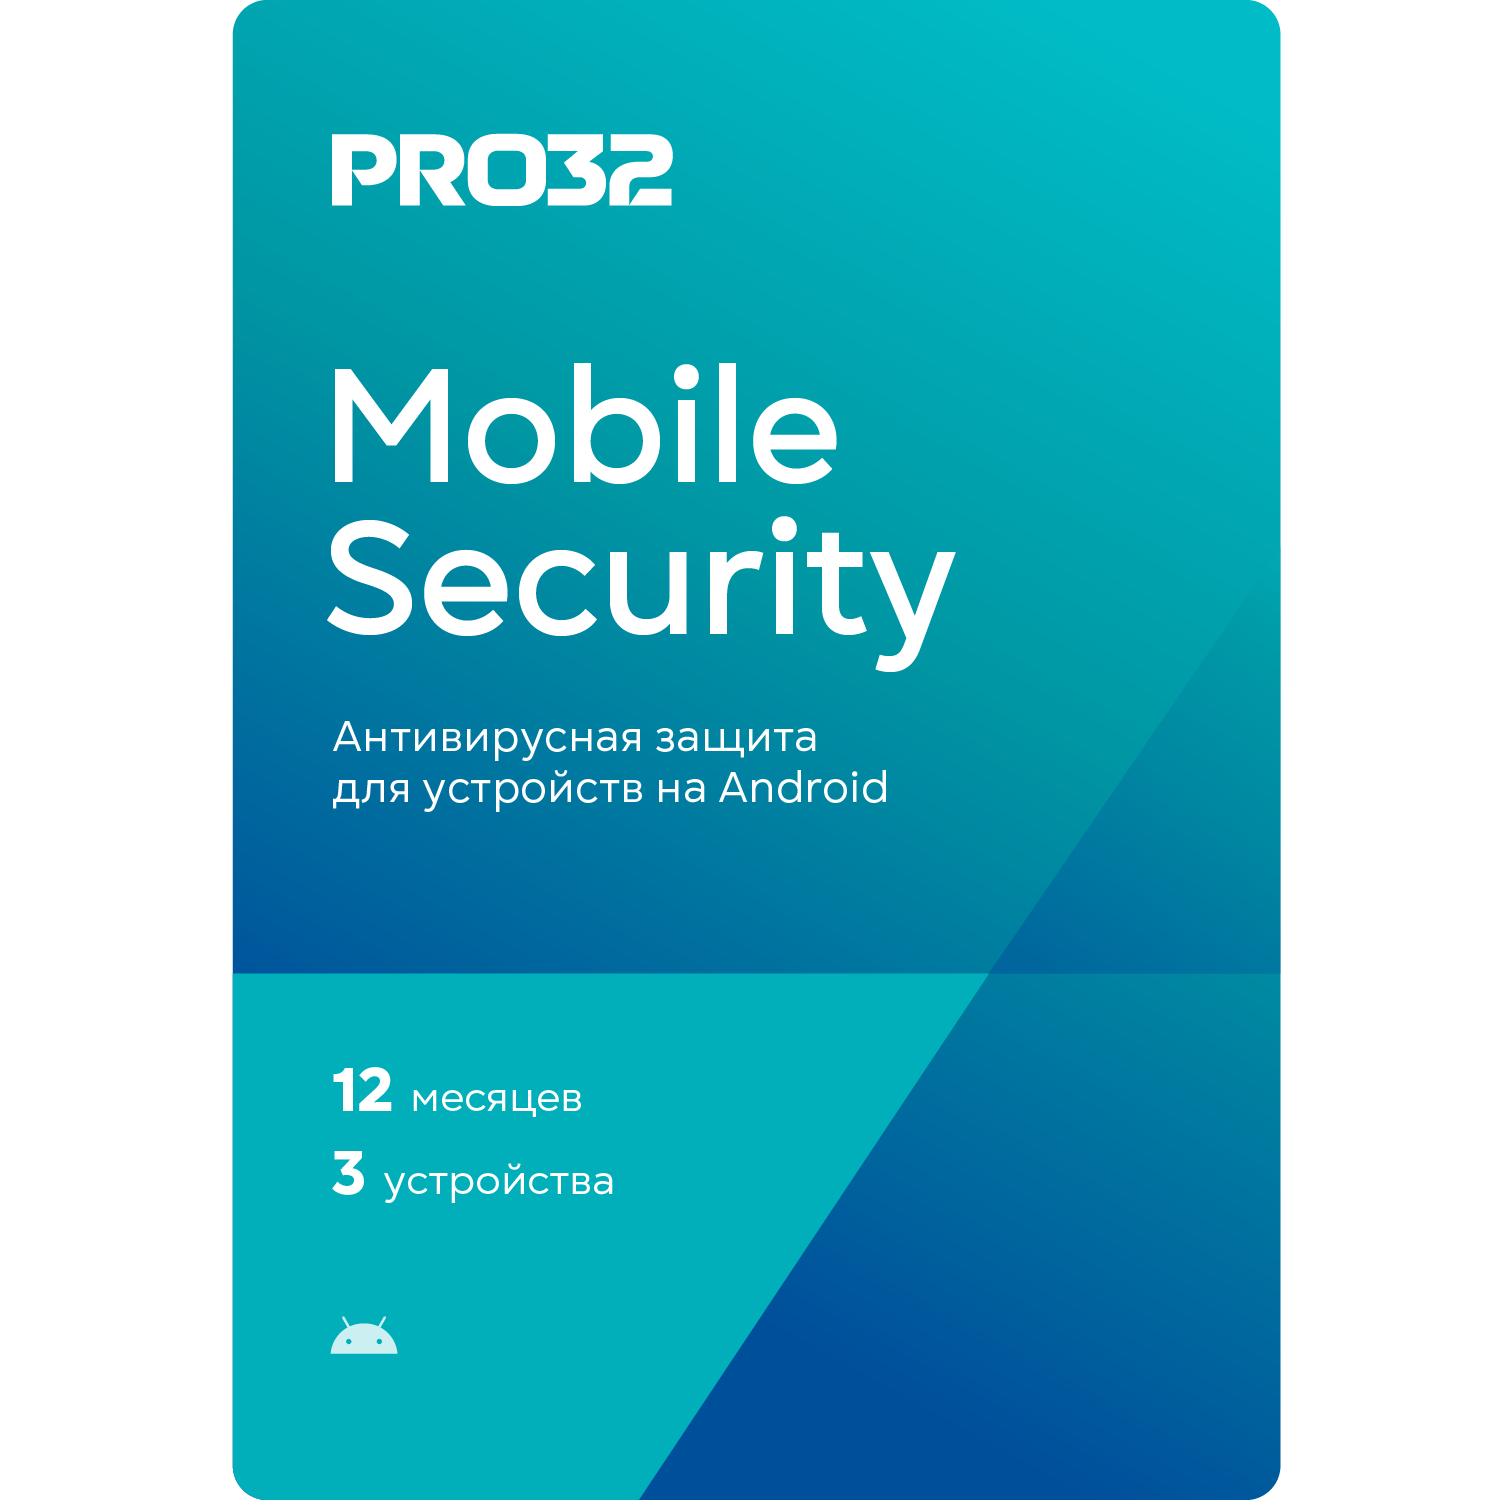 NEW - PRO32 Mobile Security